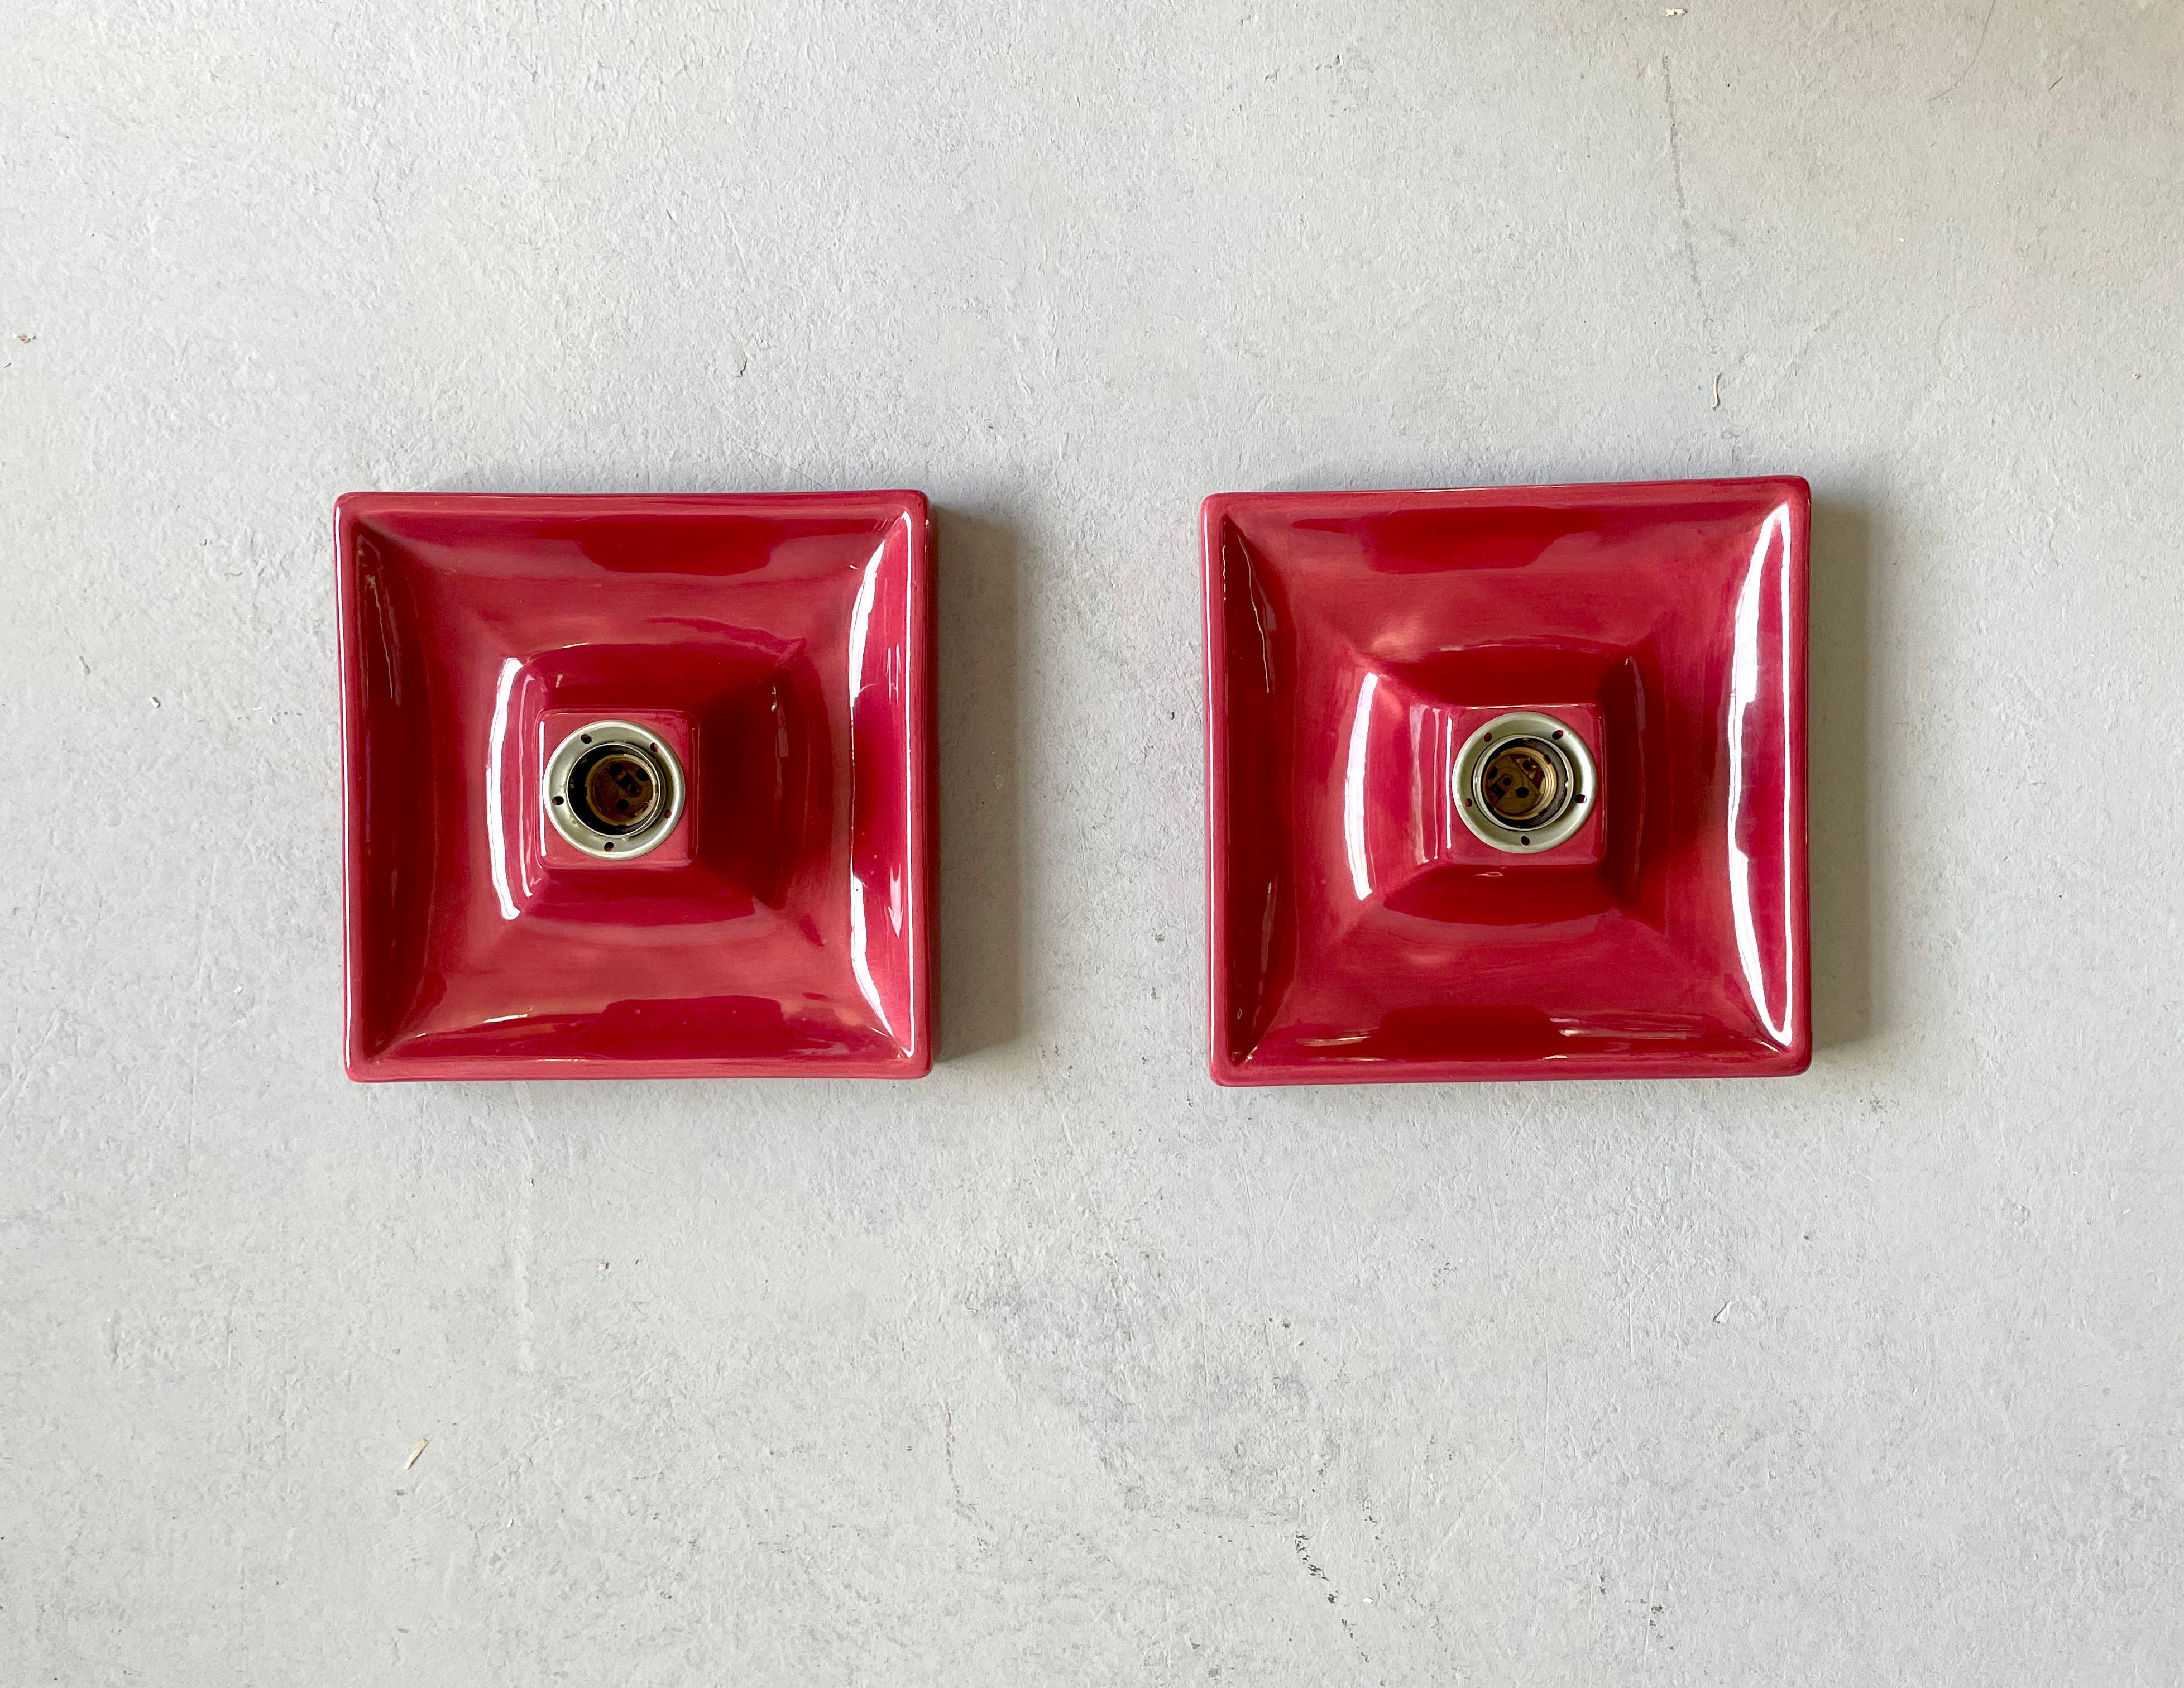 Set of 2 unused ceramic wall lamps manufactured by Hustadt Leuchten, Germany 1960s

These two lamps were stored for many years and have never been installed and used.

